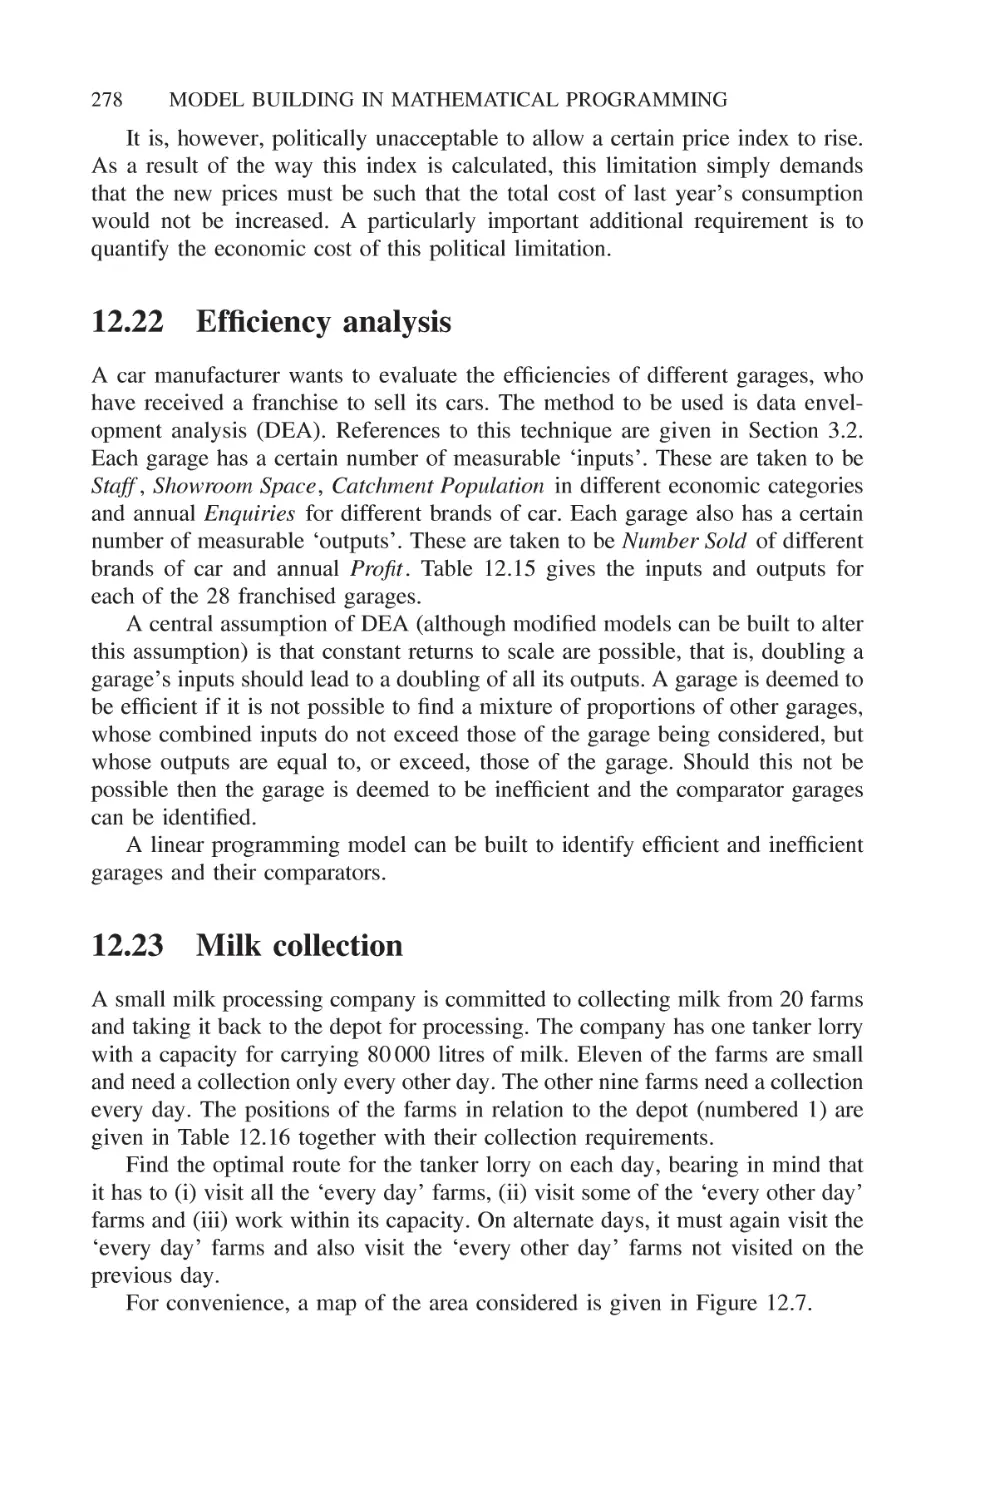 12.22 Efficiency analysis
12.23 Milk collection